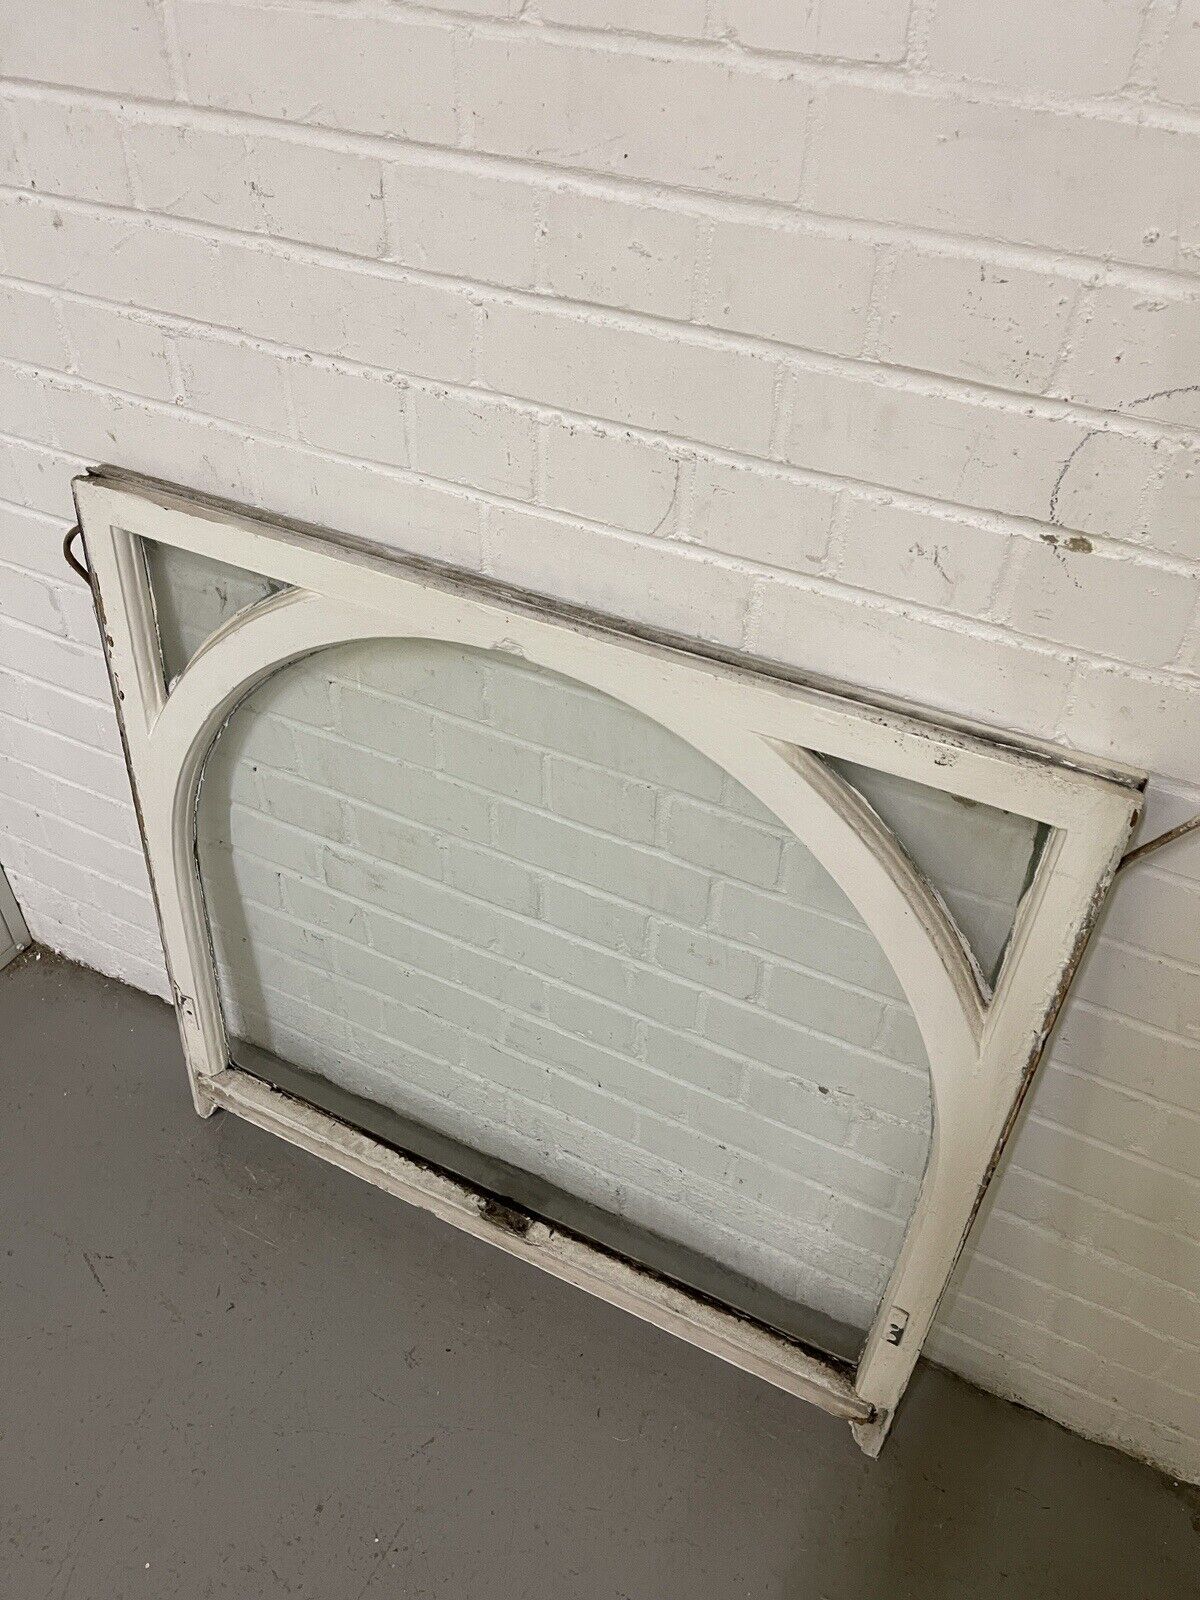 Reclaimed Old Edwardian Arch Wooden Sash Window 913 x 860mm